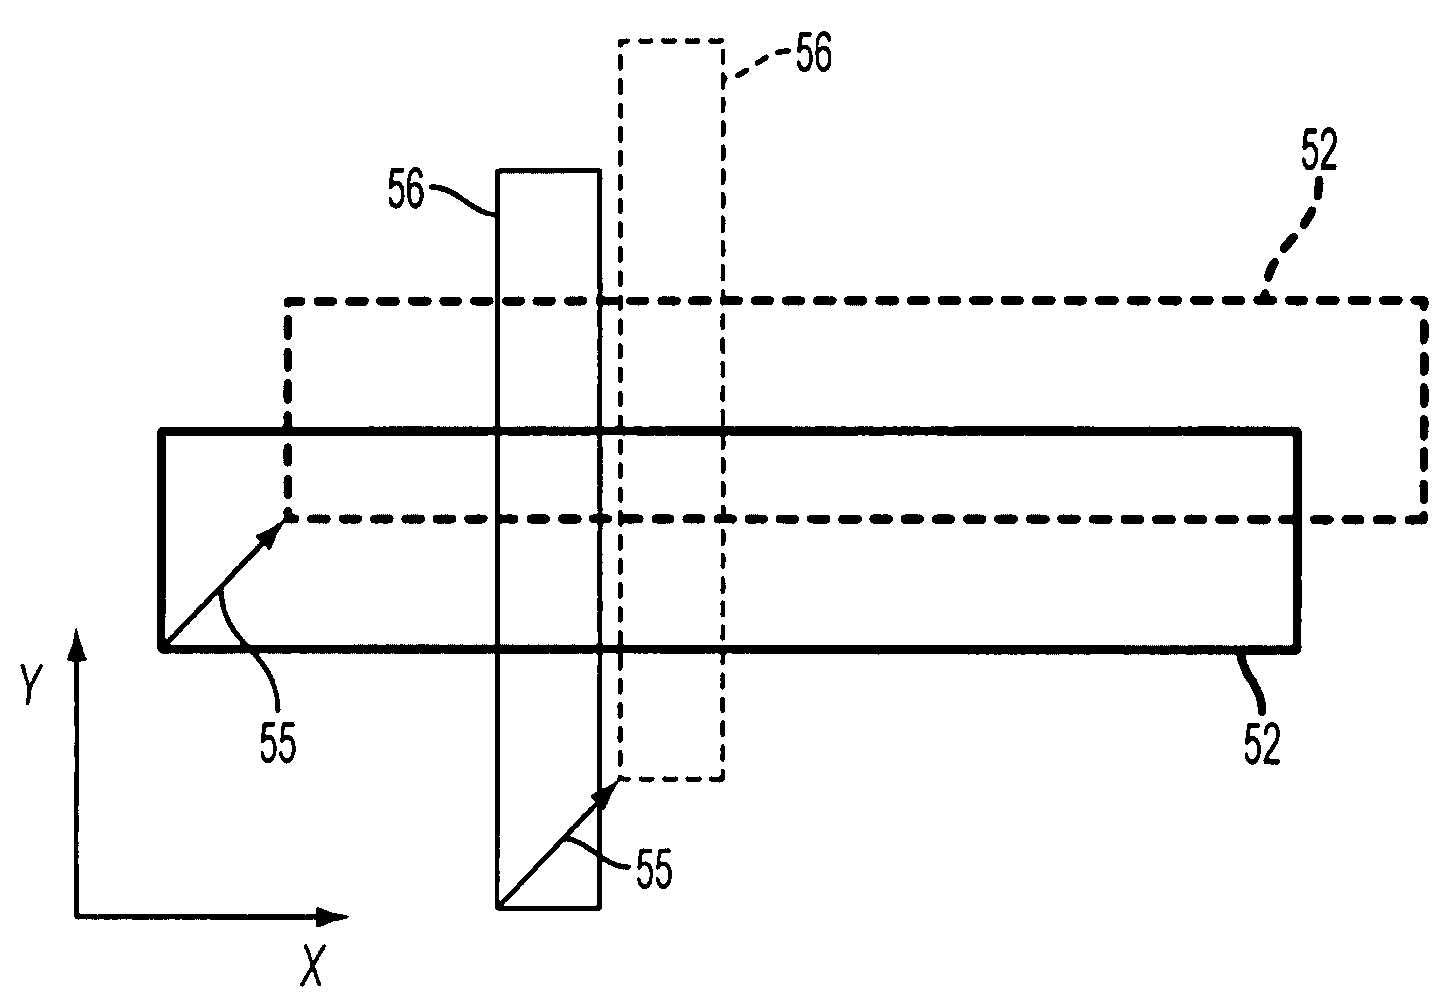 Method for enhancing the measuring accuracy when determining the coordinates of structures on a substrate